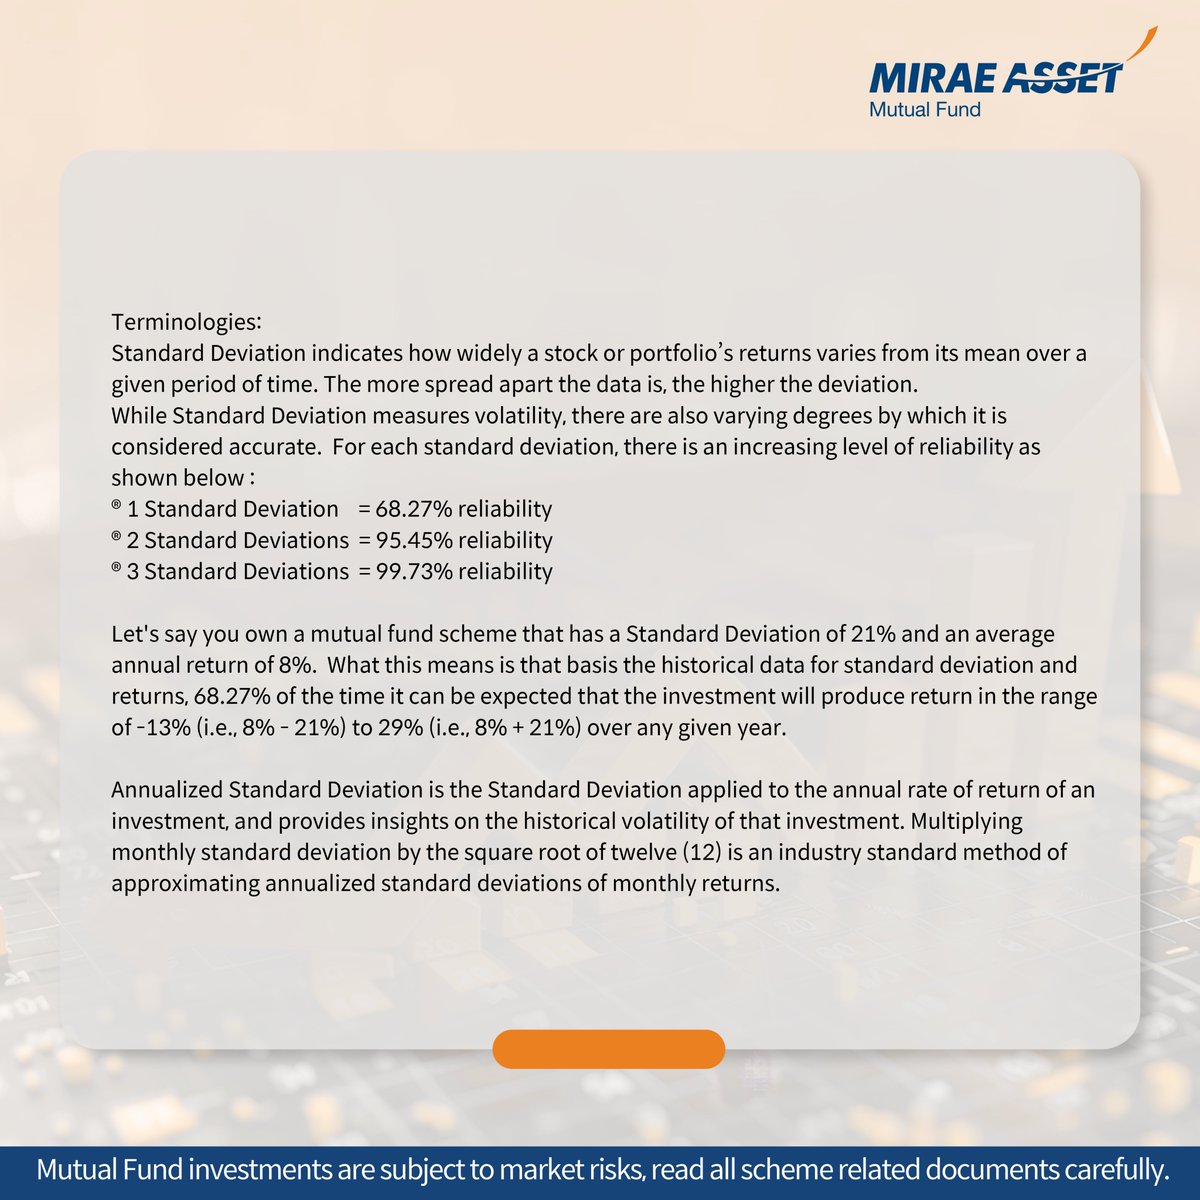 Gain a comprehensive understanding of the stress test and liquidity analysis for Mirae Asset Midcap Fund.